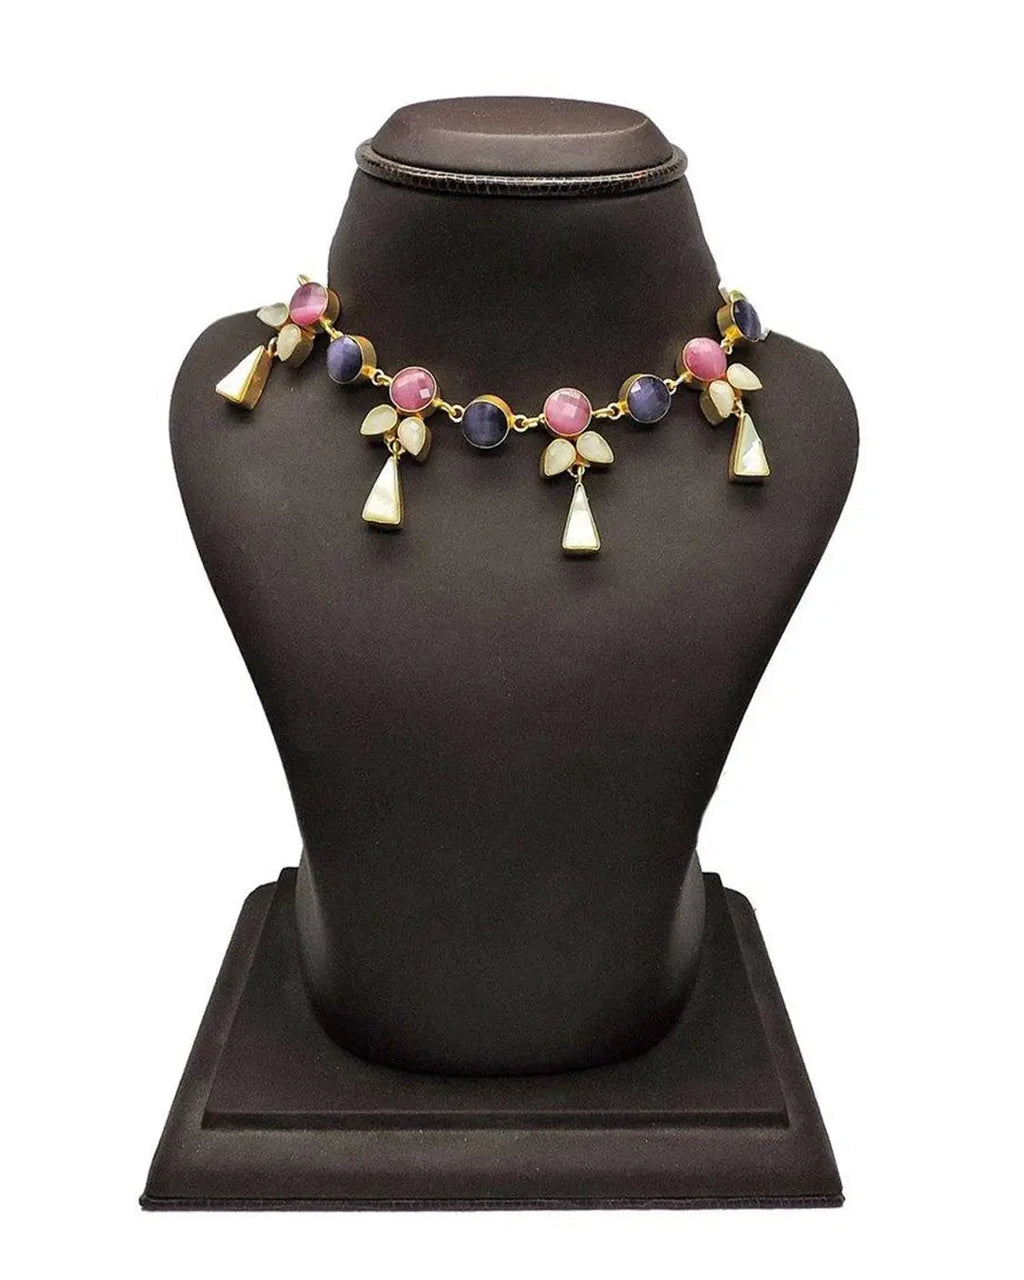 Enigma Pearl Necklace- Handcrafted Jewellery from Dori